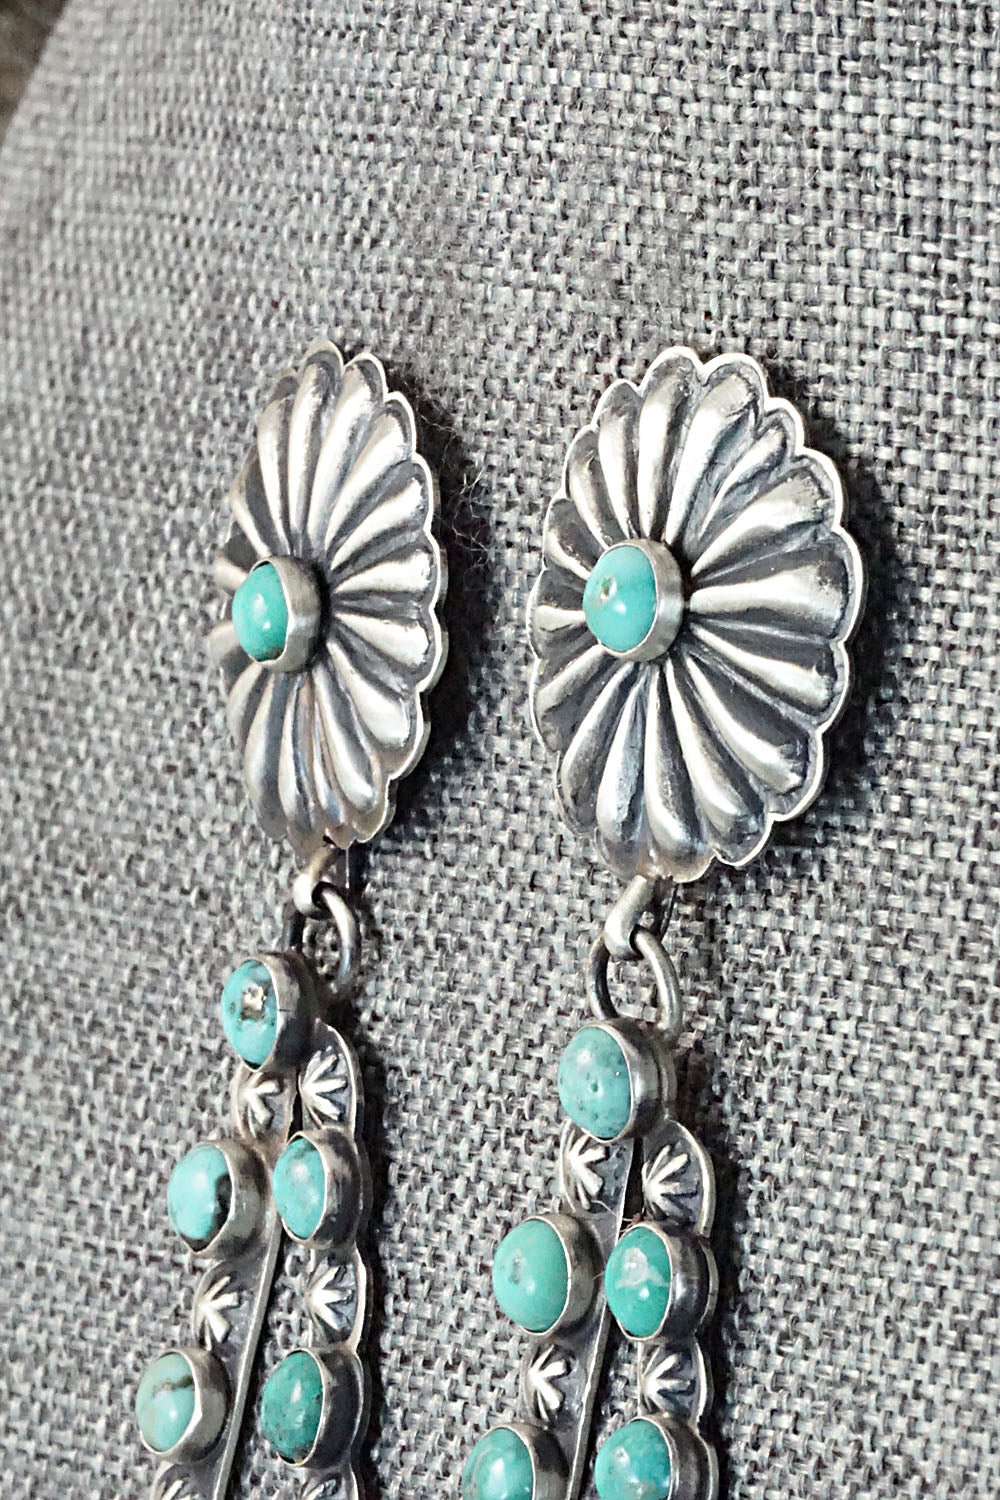 Turquoise and Sterling Silver Earrings - Eugene Charley